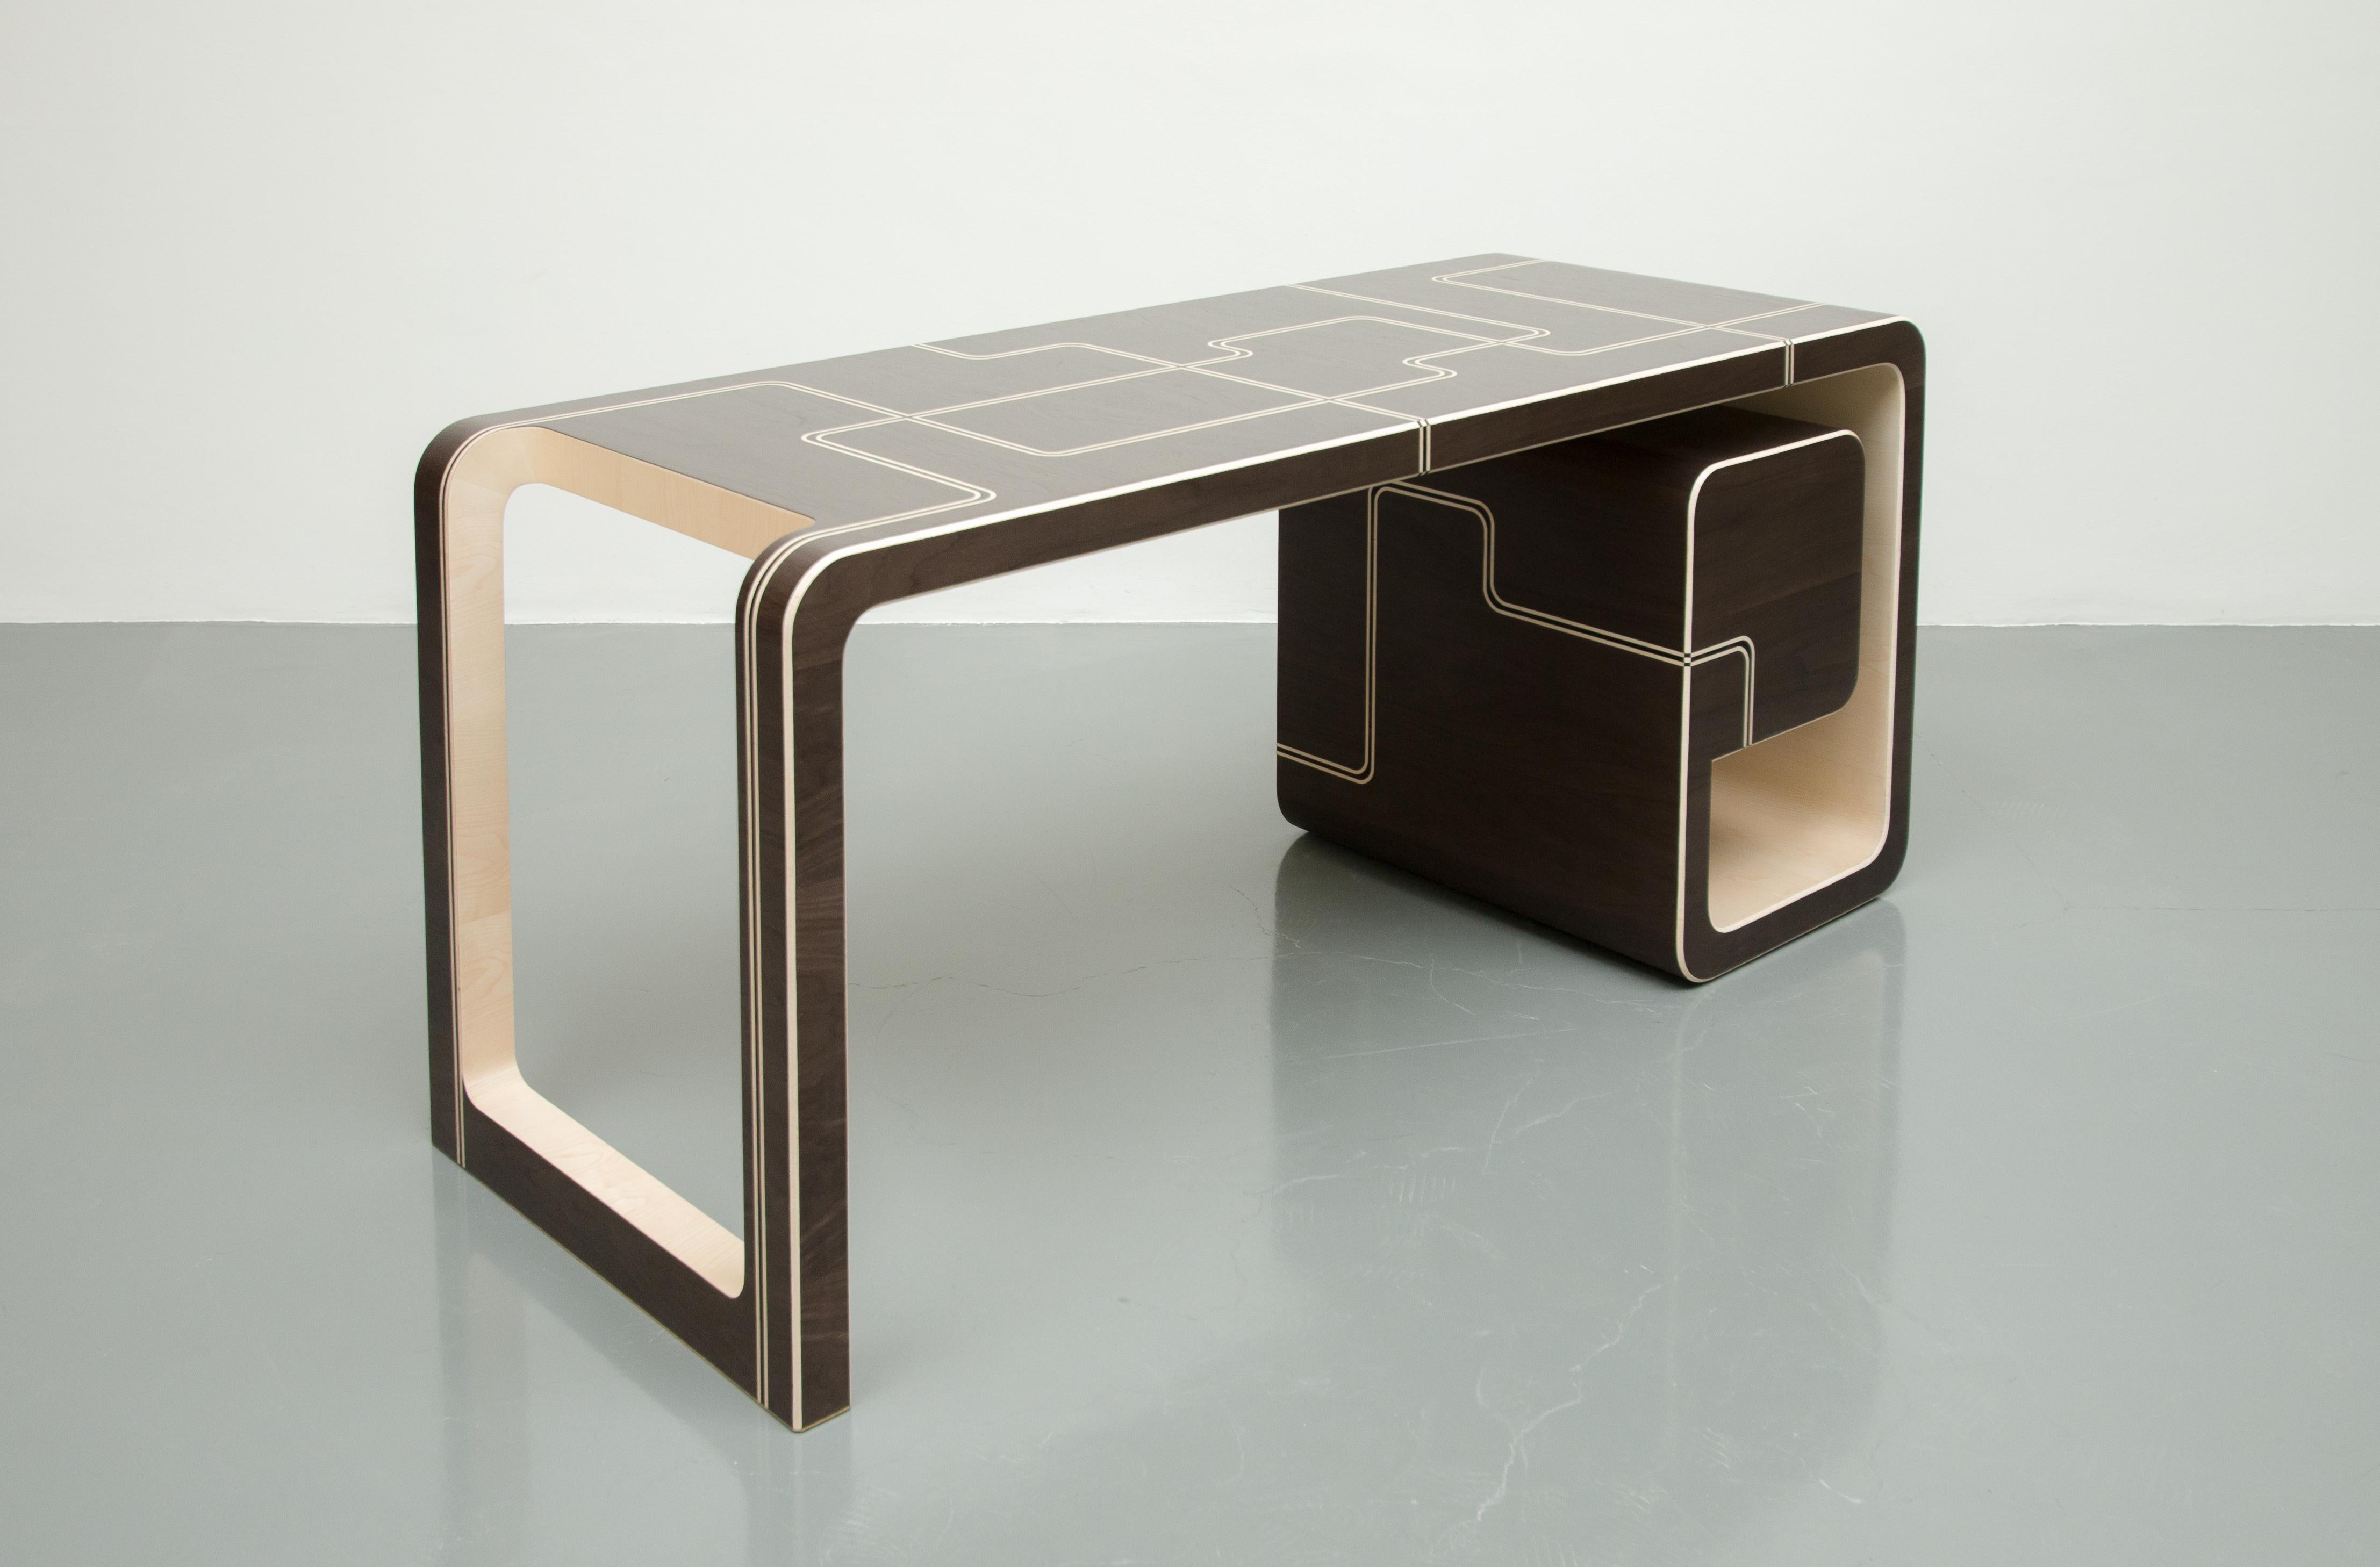 Designed as a modern elegant and at the same time functional desk, 